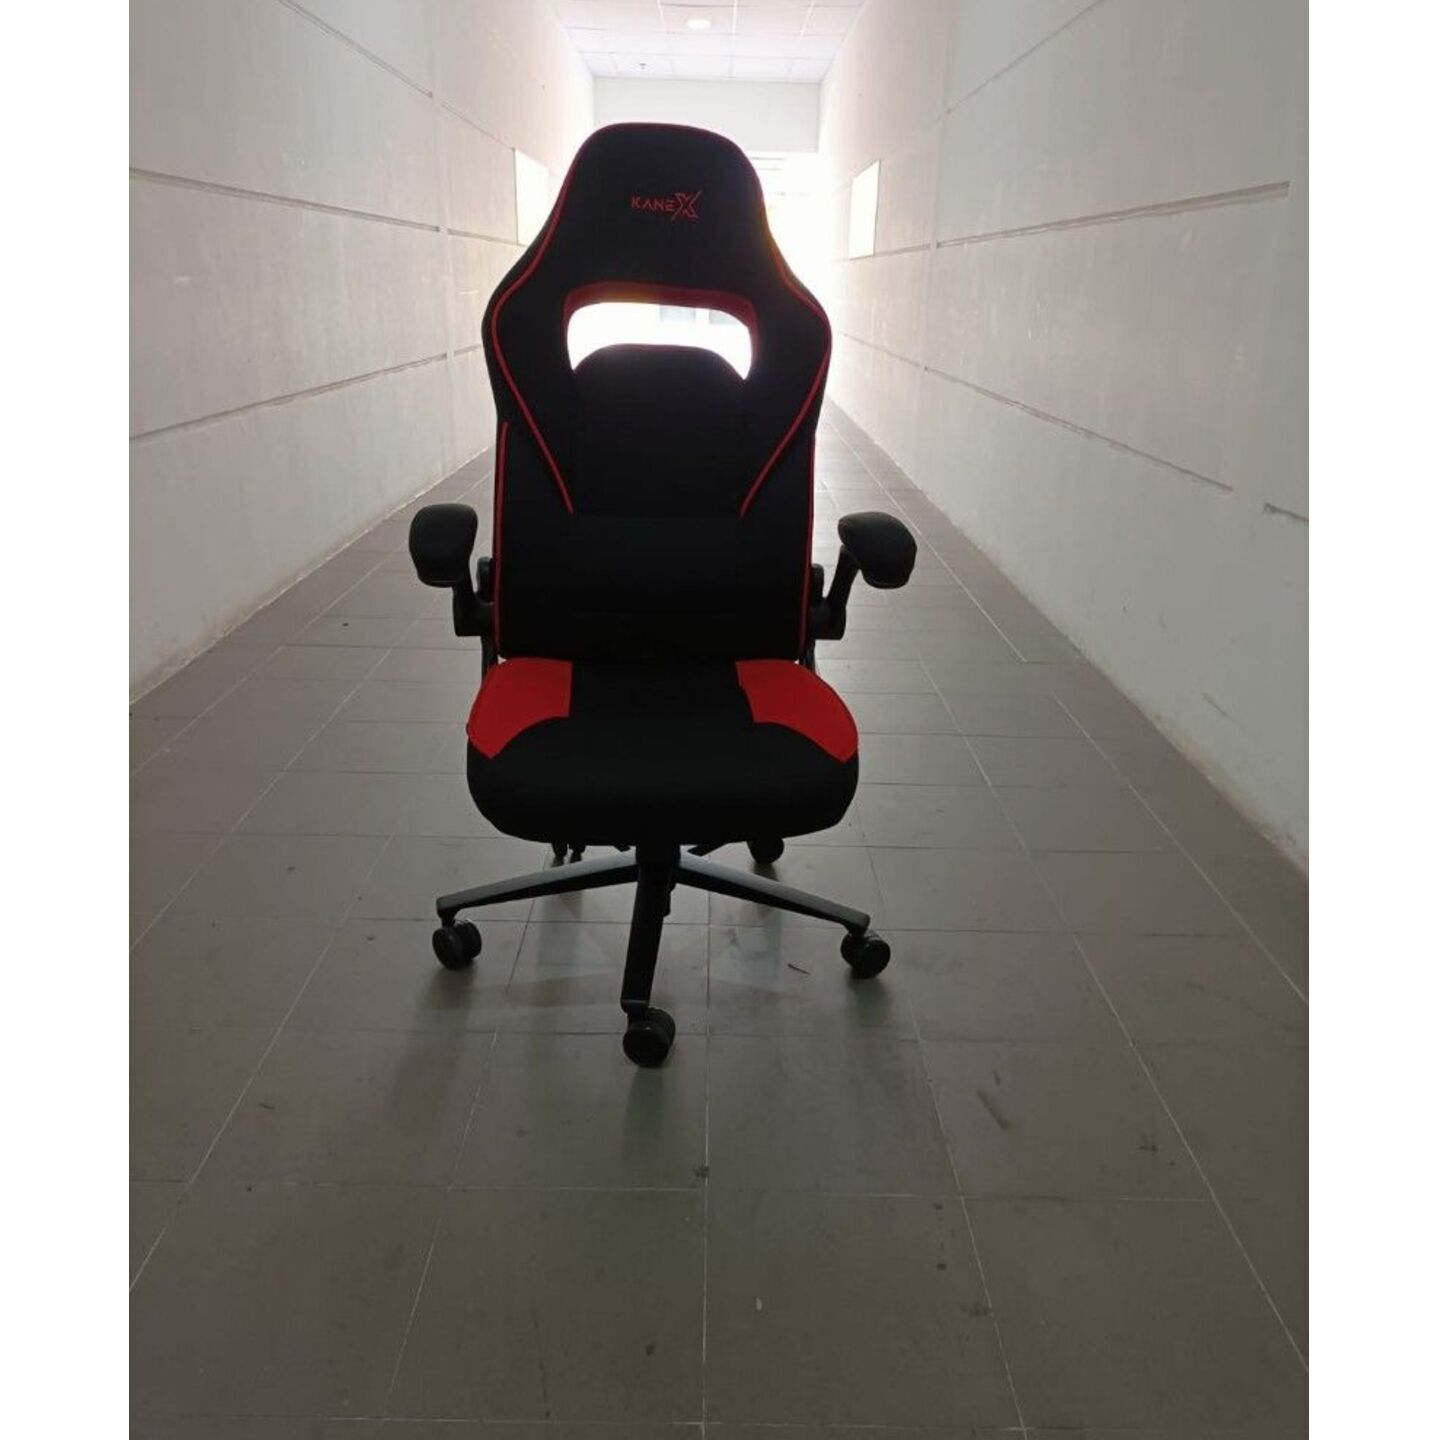 KX ARGUS Professional Gaming Chair in BLACK & RED Fabric